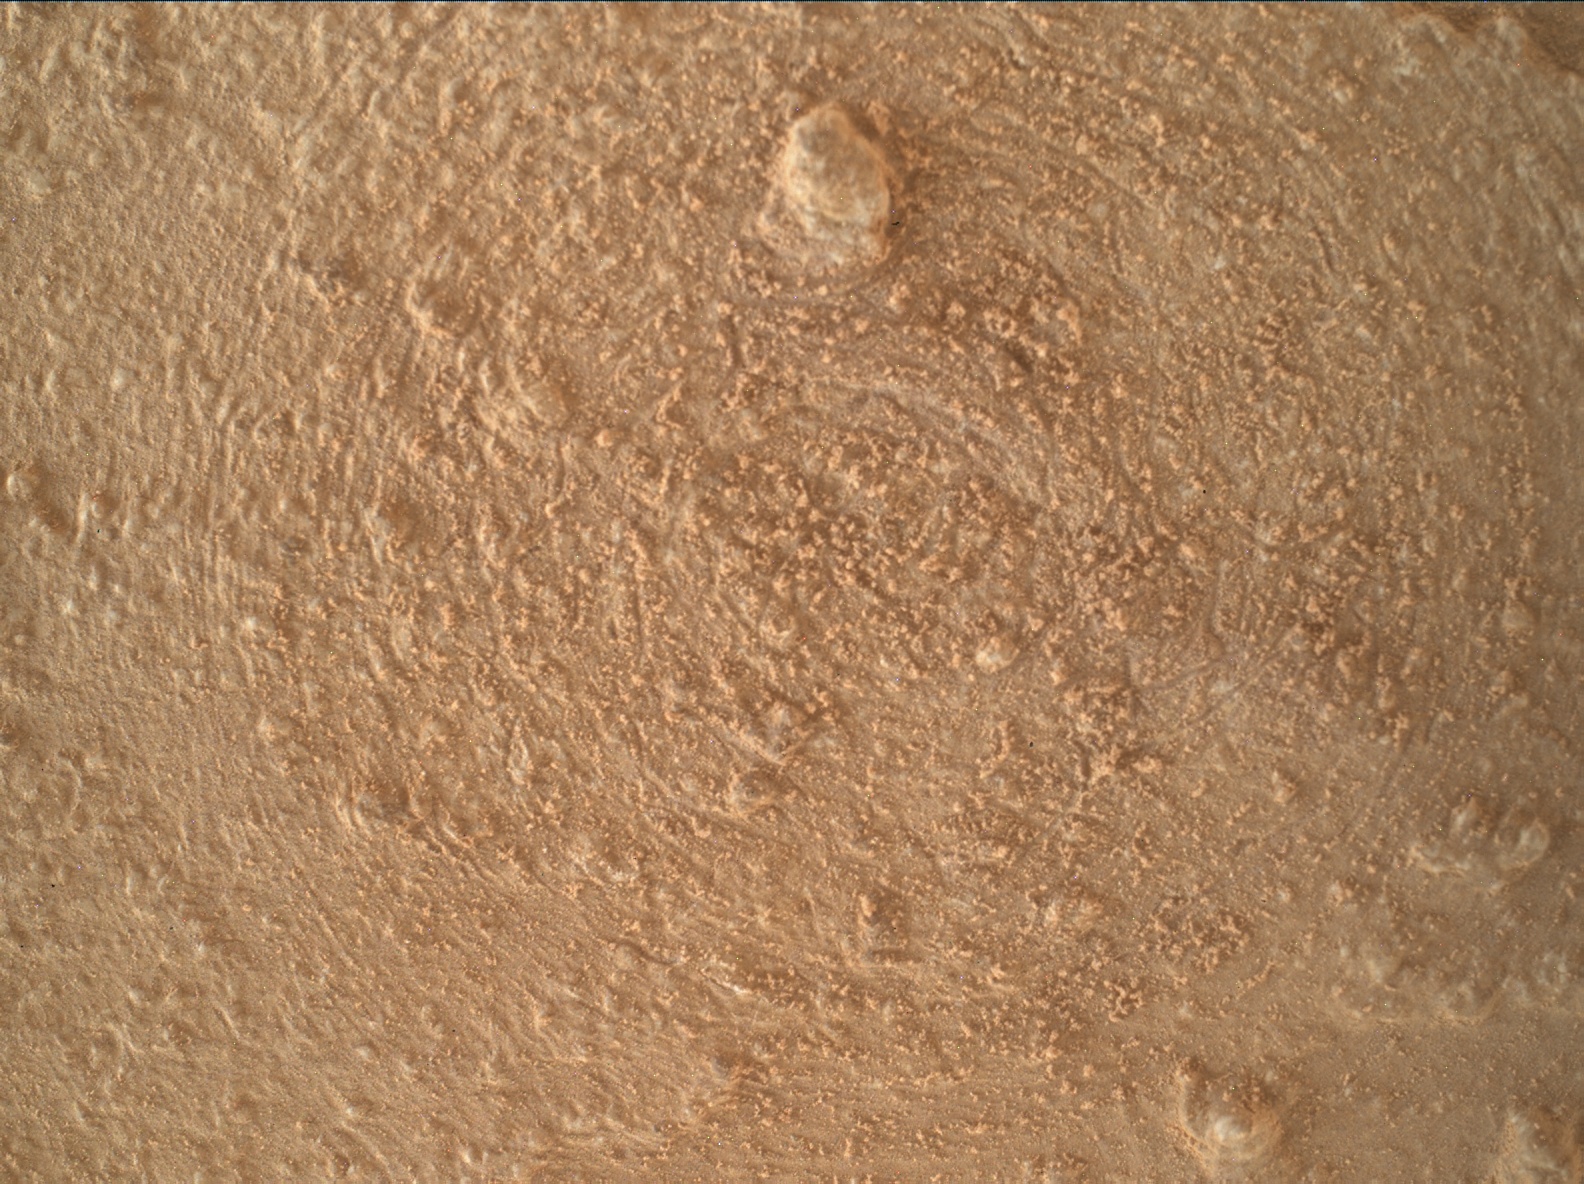 Nasa's Mars rover Curiosity acquired this image using its Mars Hand Lens Imager (MAHLI) on Sol 3819